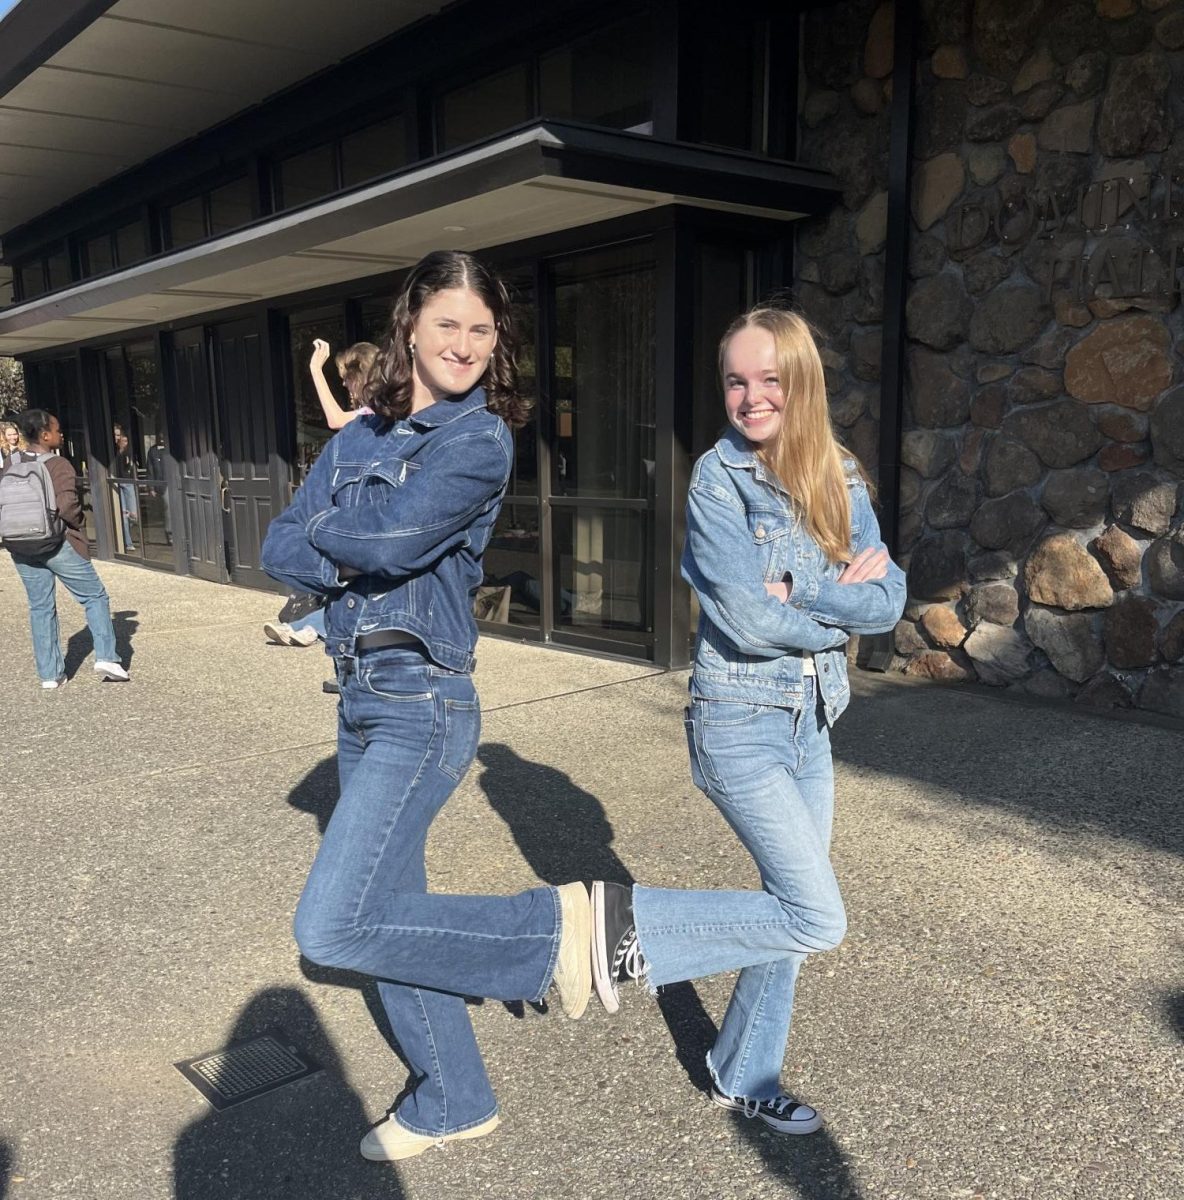 There were so many well dressed groups and duos, but Maple and Caroline definitely were one of the best. The different shades of denim from head to toe definitely made their outfits POP! 
